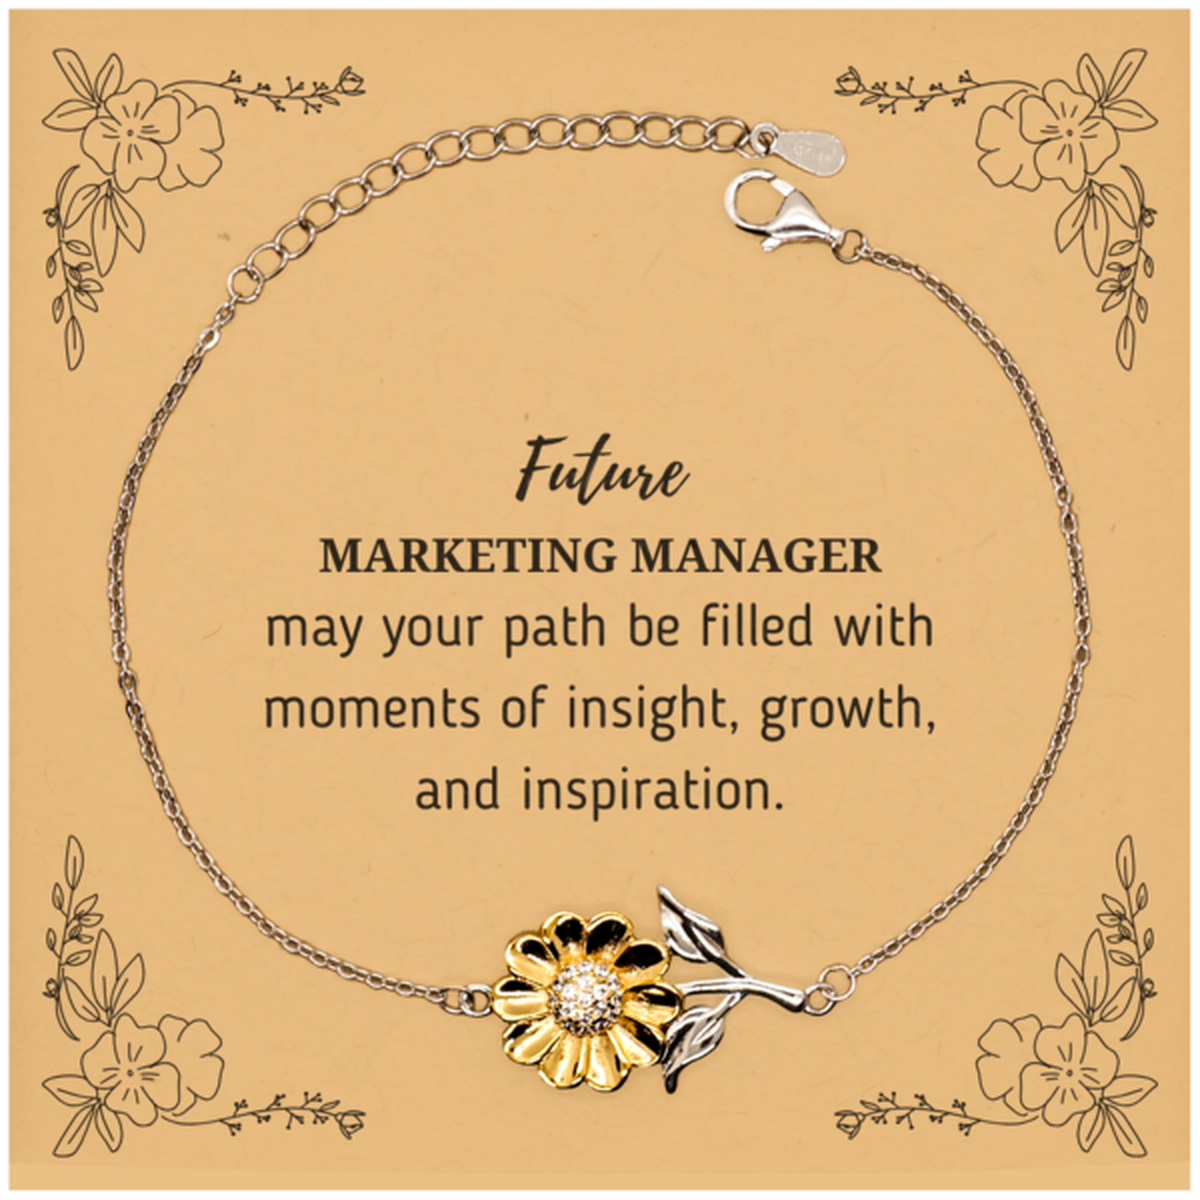 Future Marketing Manager Gifts, May your path be filled with moments of insight, Graduation Gifts for New Marketing Manager, Christmas Unique Sunflower Bracelet For Men, Women, Friends